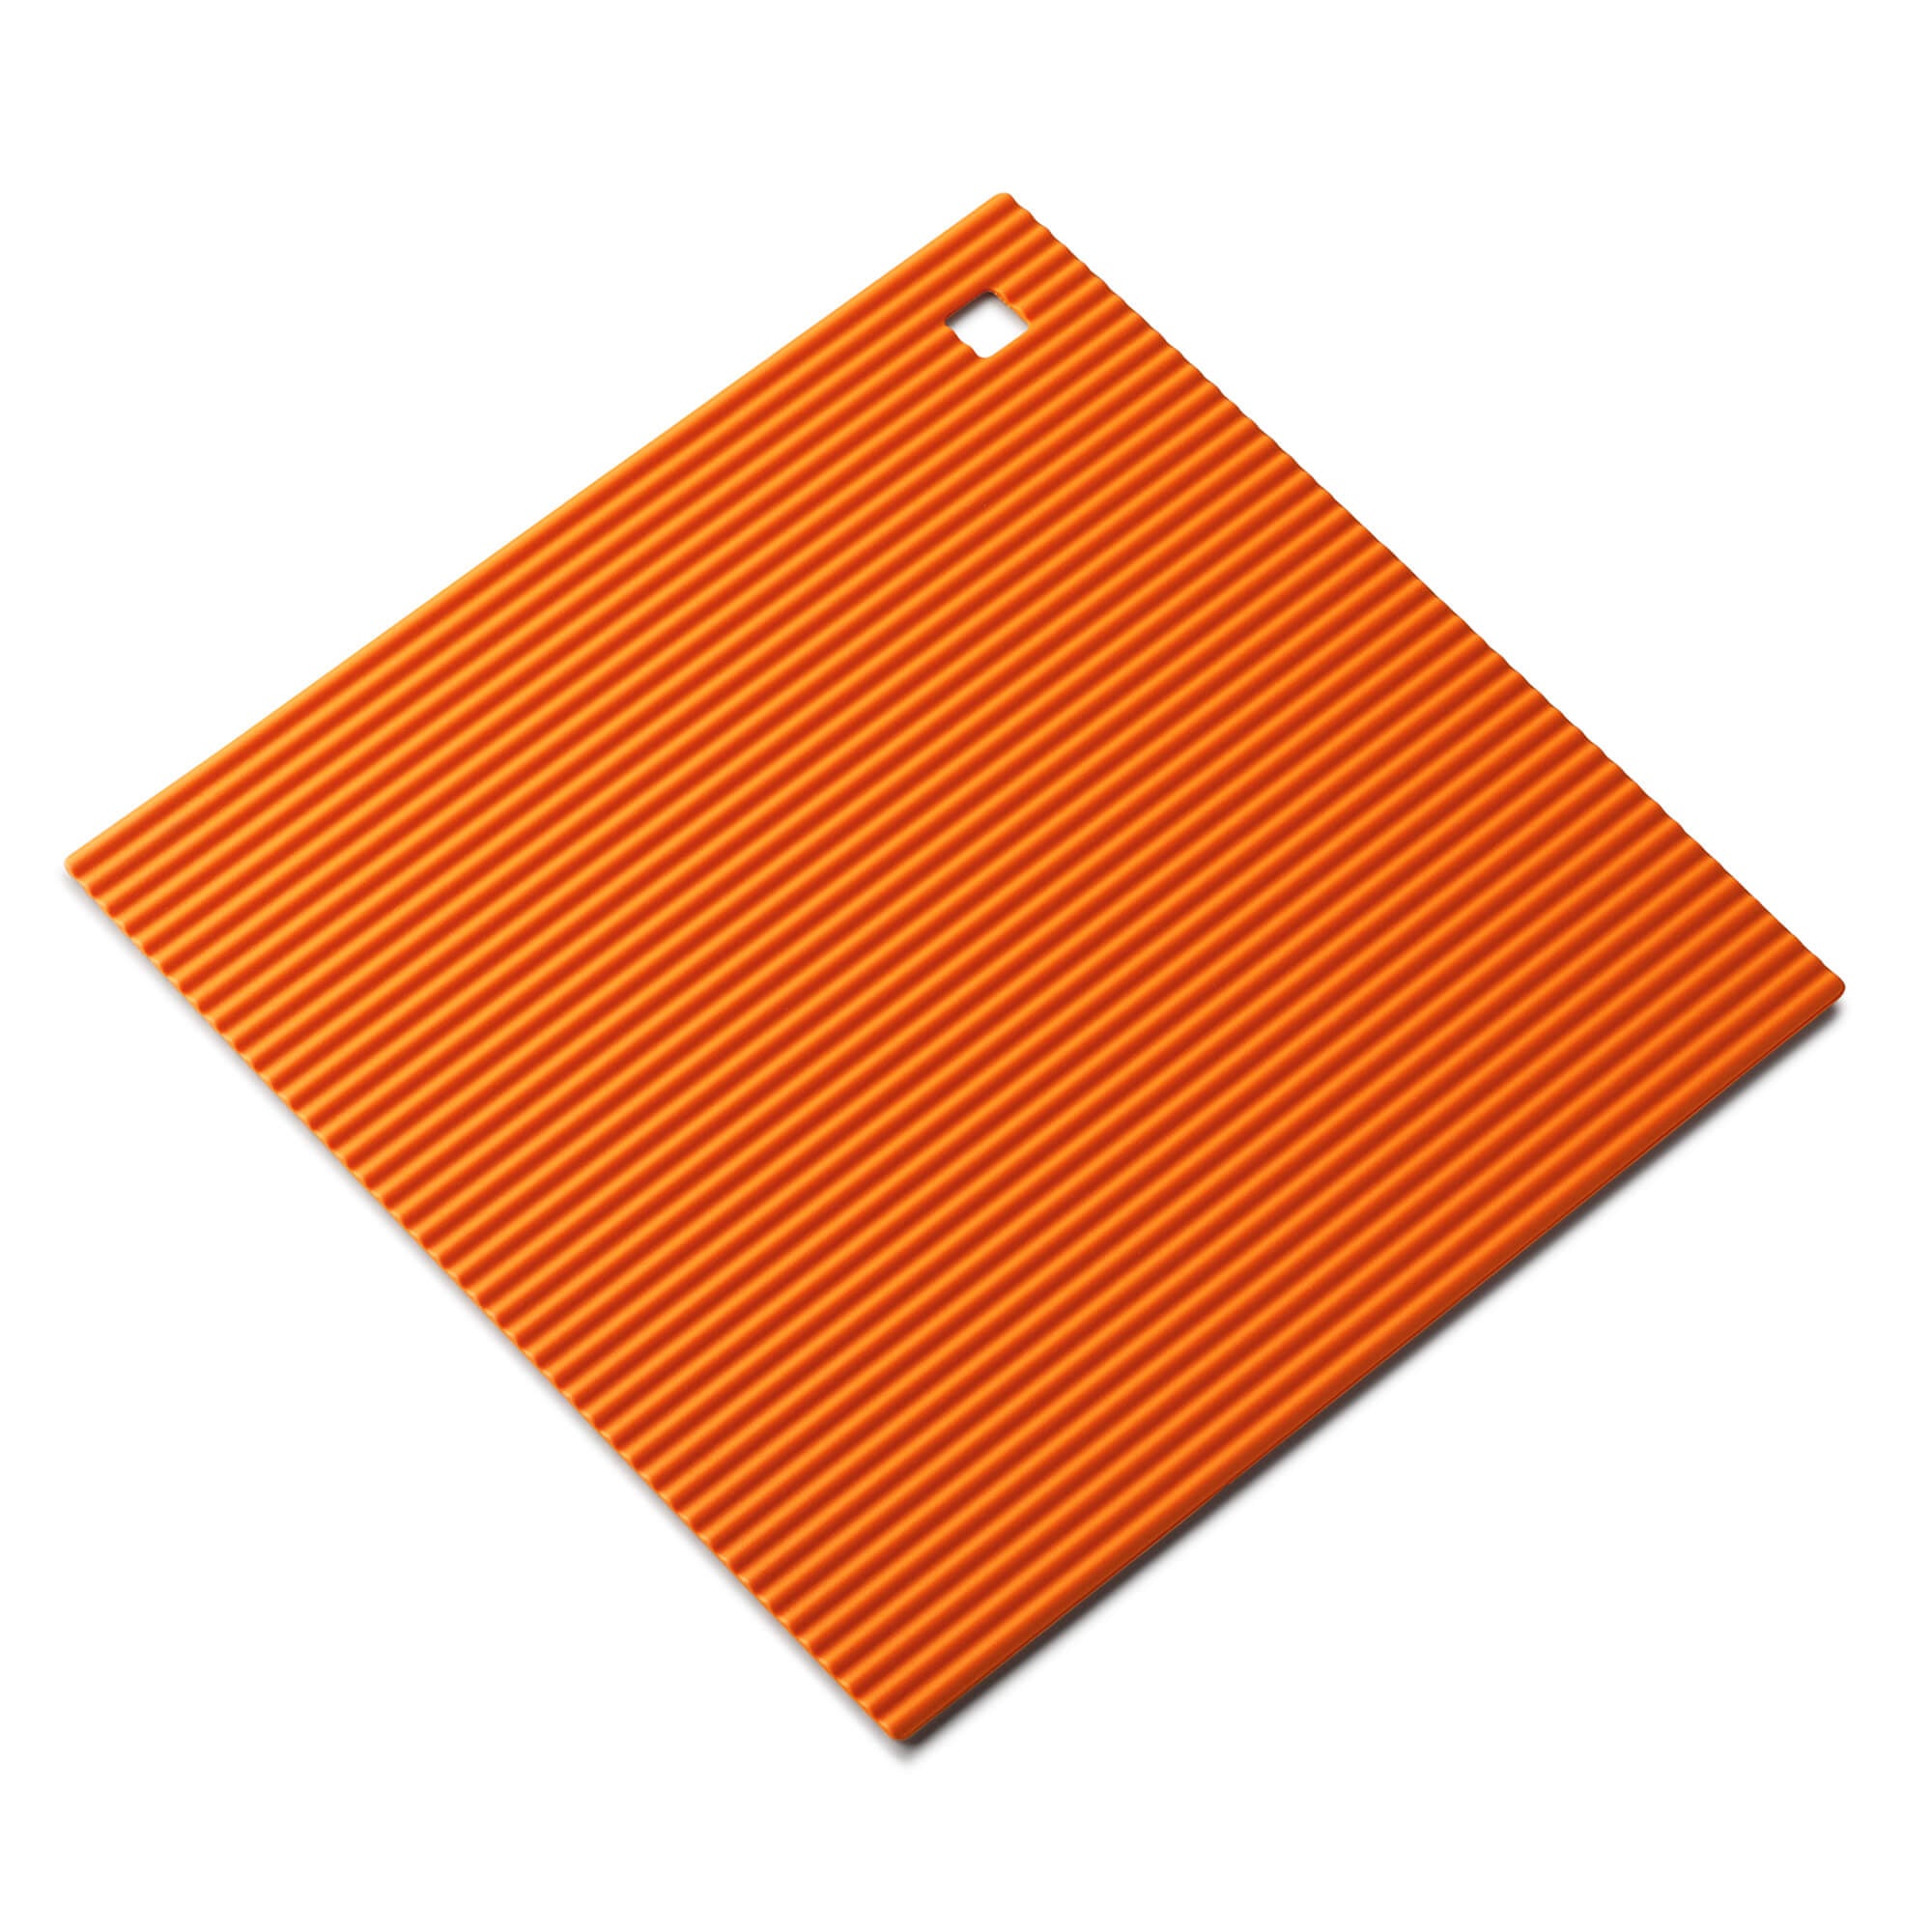 Zeal Silicone Draining Mat - Assorted, Cooking & Dining, Buy Online, UK  Delivery